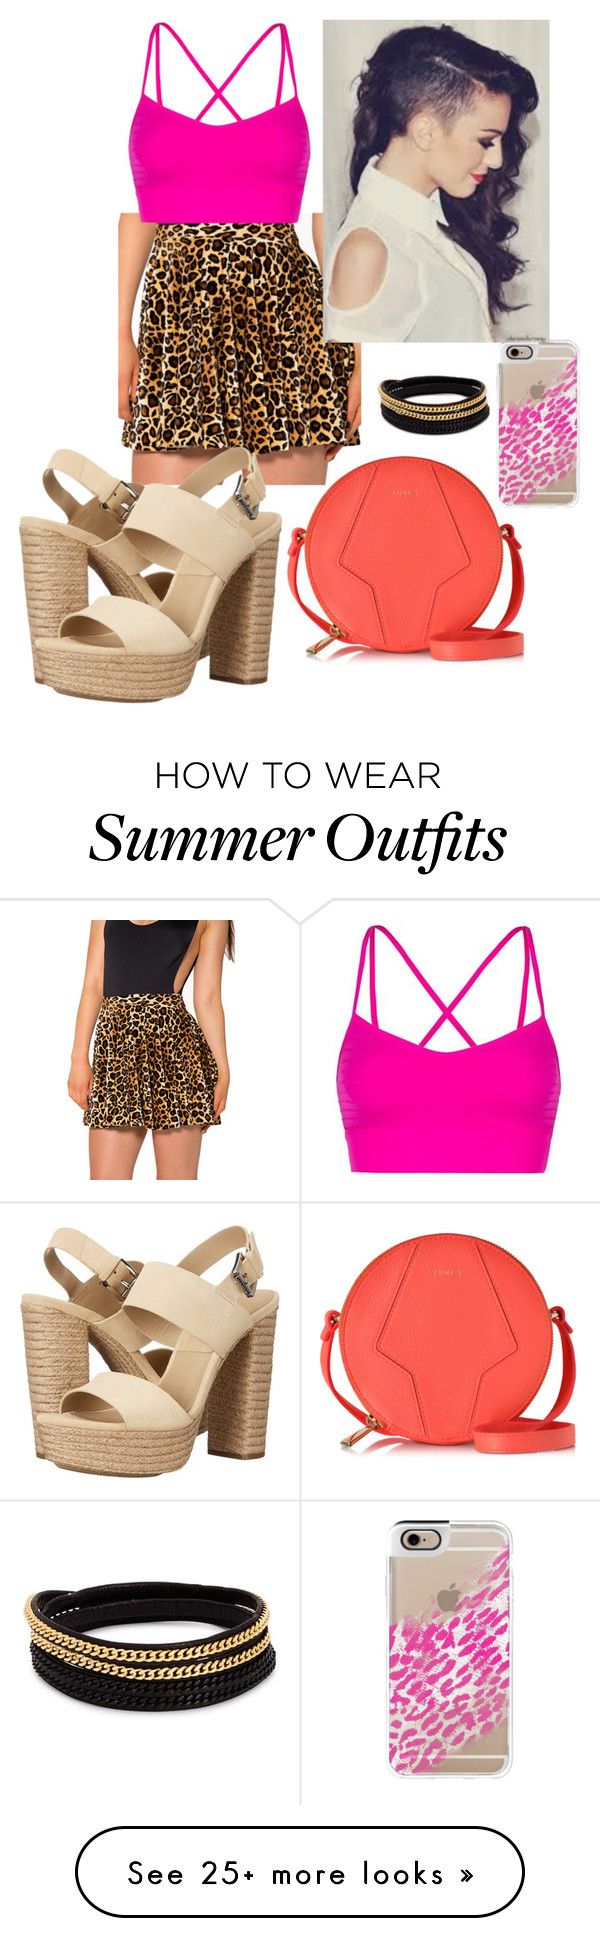 "(Out outfit) Jasmine" by xoxojelly on Polyvore featuring Casetify, Lo...